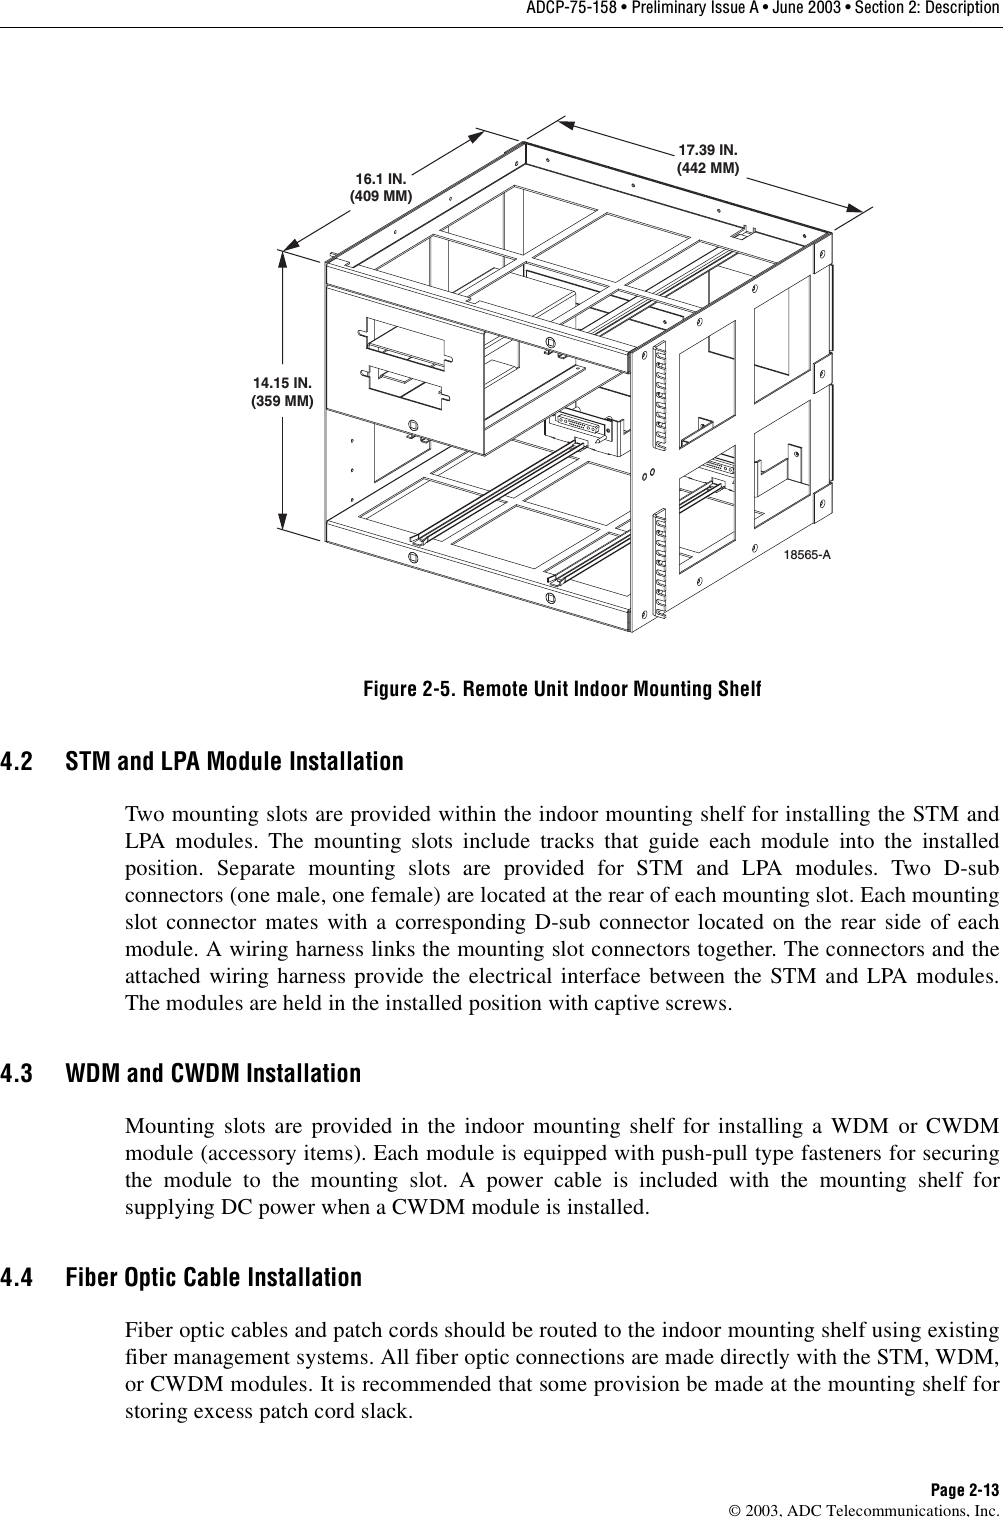 ADCP-75-158 • Preliminary Issue A • June 2003 • Section 2: DescriptionPage 2-13© 2003, ADC Telecommunications, Inc.Figure 2-5. Remote Unit Indoor Mounting Shelf4.2 STM and LPA Module InstallationTwo mounting slots are provided within the indoor mounting shelf for installing the STM andLPA modules. The mounting slots include tracks that guide each module into the installedposition. Separate mounting slots are provided for STM and LPA modules. Two D-subconnectors (one male, one female) are located at the rear of each mounting slot. Each mountingslot connector mates with a corresponding D-sub connector located on the rear side of eachmodule. A wiring harness links the mounting slot connectors together. The connectors and theattached wiring harness provide the electrical interface between the STM and LPA modules.The modules are held in the installed position with captive screws. 4.3 WDM and CWDM InstallationMounting slots are provided in the indoor mounting shelf for installing a WDM or CWDMmodule (accessory items). Each module is equipped with push-pull type fasteners for securingthe module to the mounting slot. A power cable is included with the mounting shelf forsupplying DC power when a CWDM module is installed. 4.4 Fiber Optic Cable InstallationFiber optic cables and patch cords should be routed to the indoor mounting shelf using existingfiber management systems. All fiber optic connections are made directly with the STM, WDM,or CWDM modules. It is recommended that some provision be made at the mounting shelf forstoring excess patch cord slack. 14.15 IN.(359 MM)16.1 IN.(409 MM)17.39 IN.(442 MM)18565-A